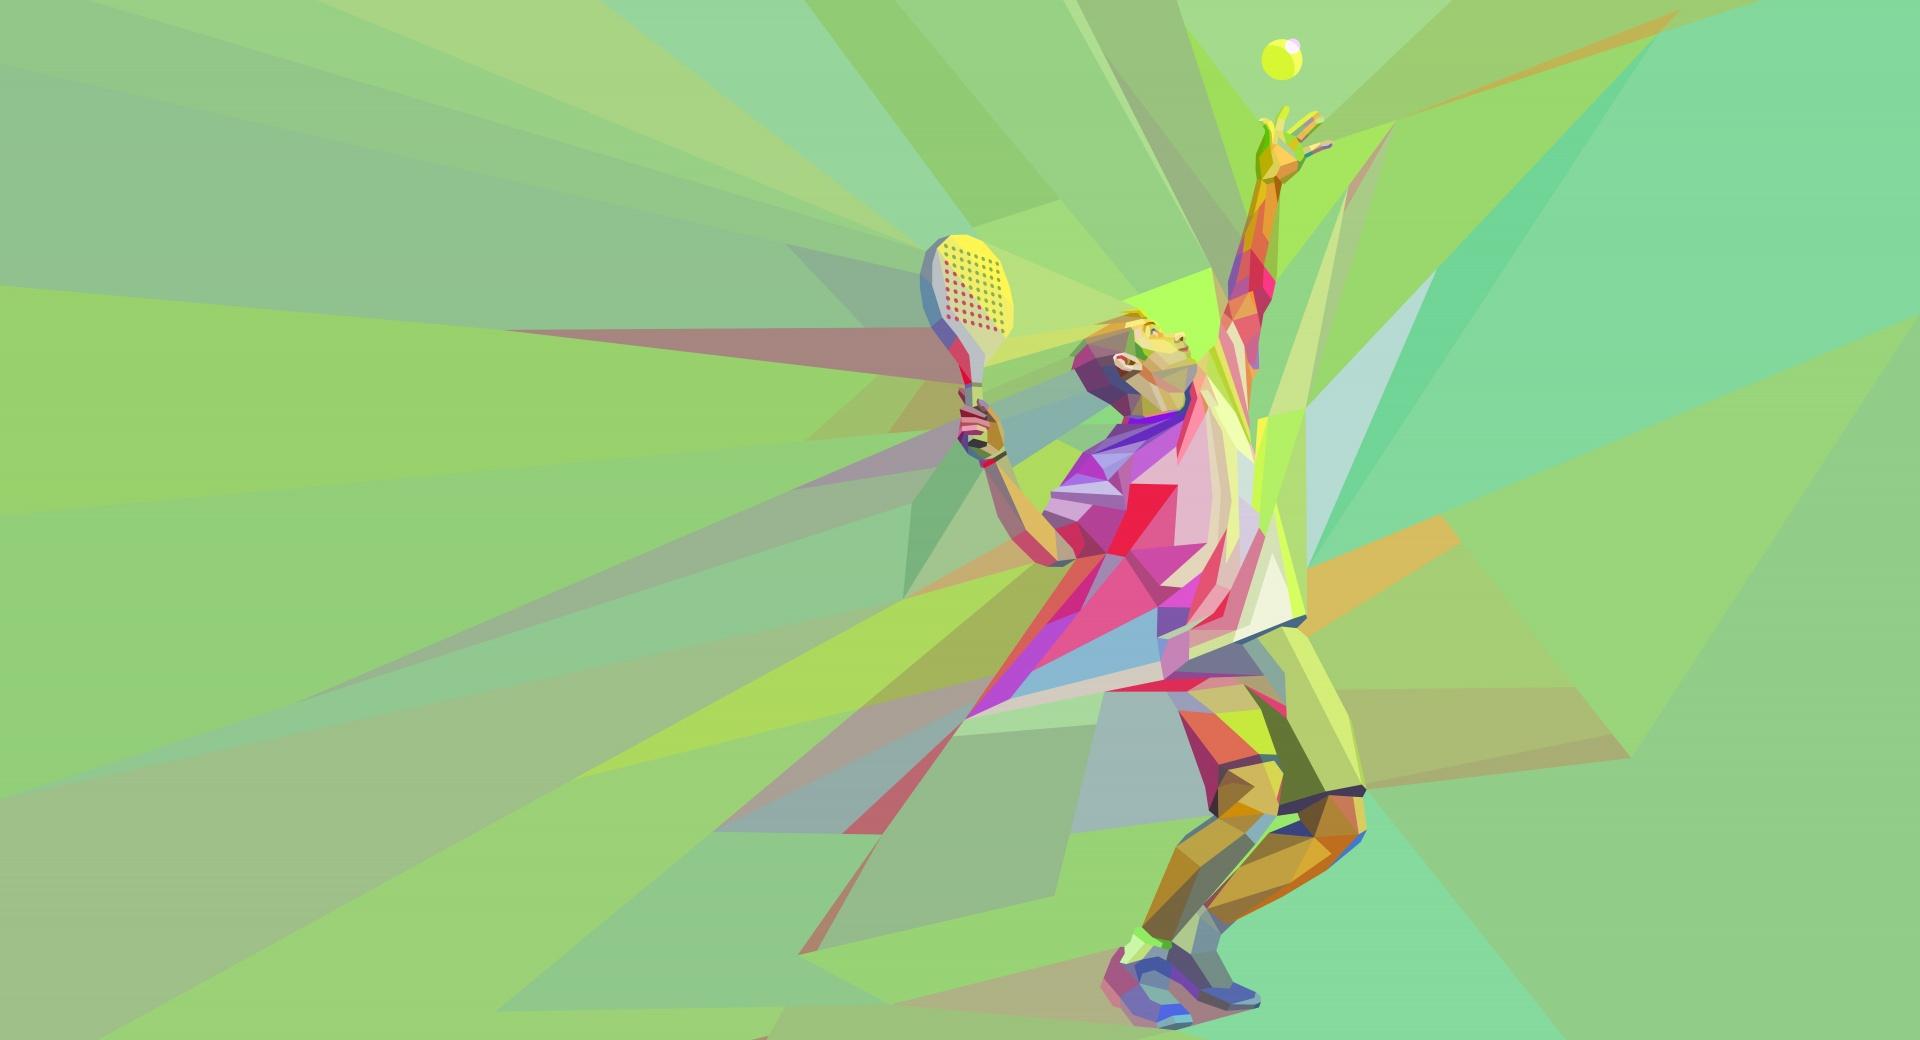 Tennis Serve wallpapers HD quality